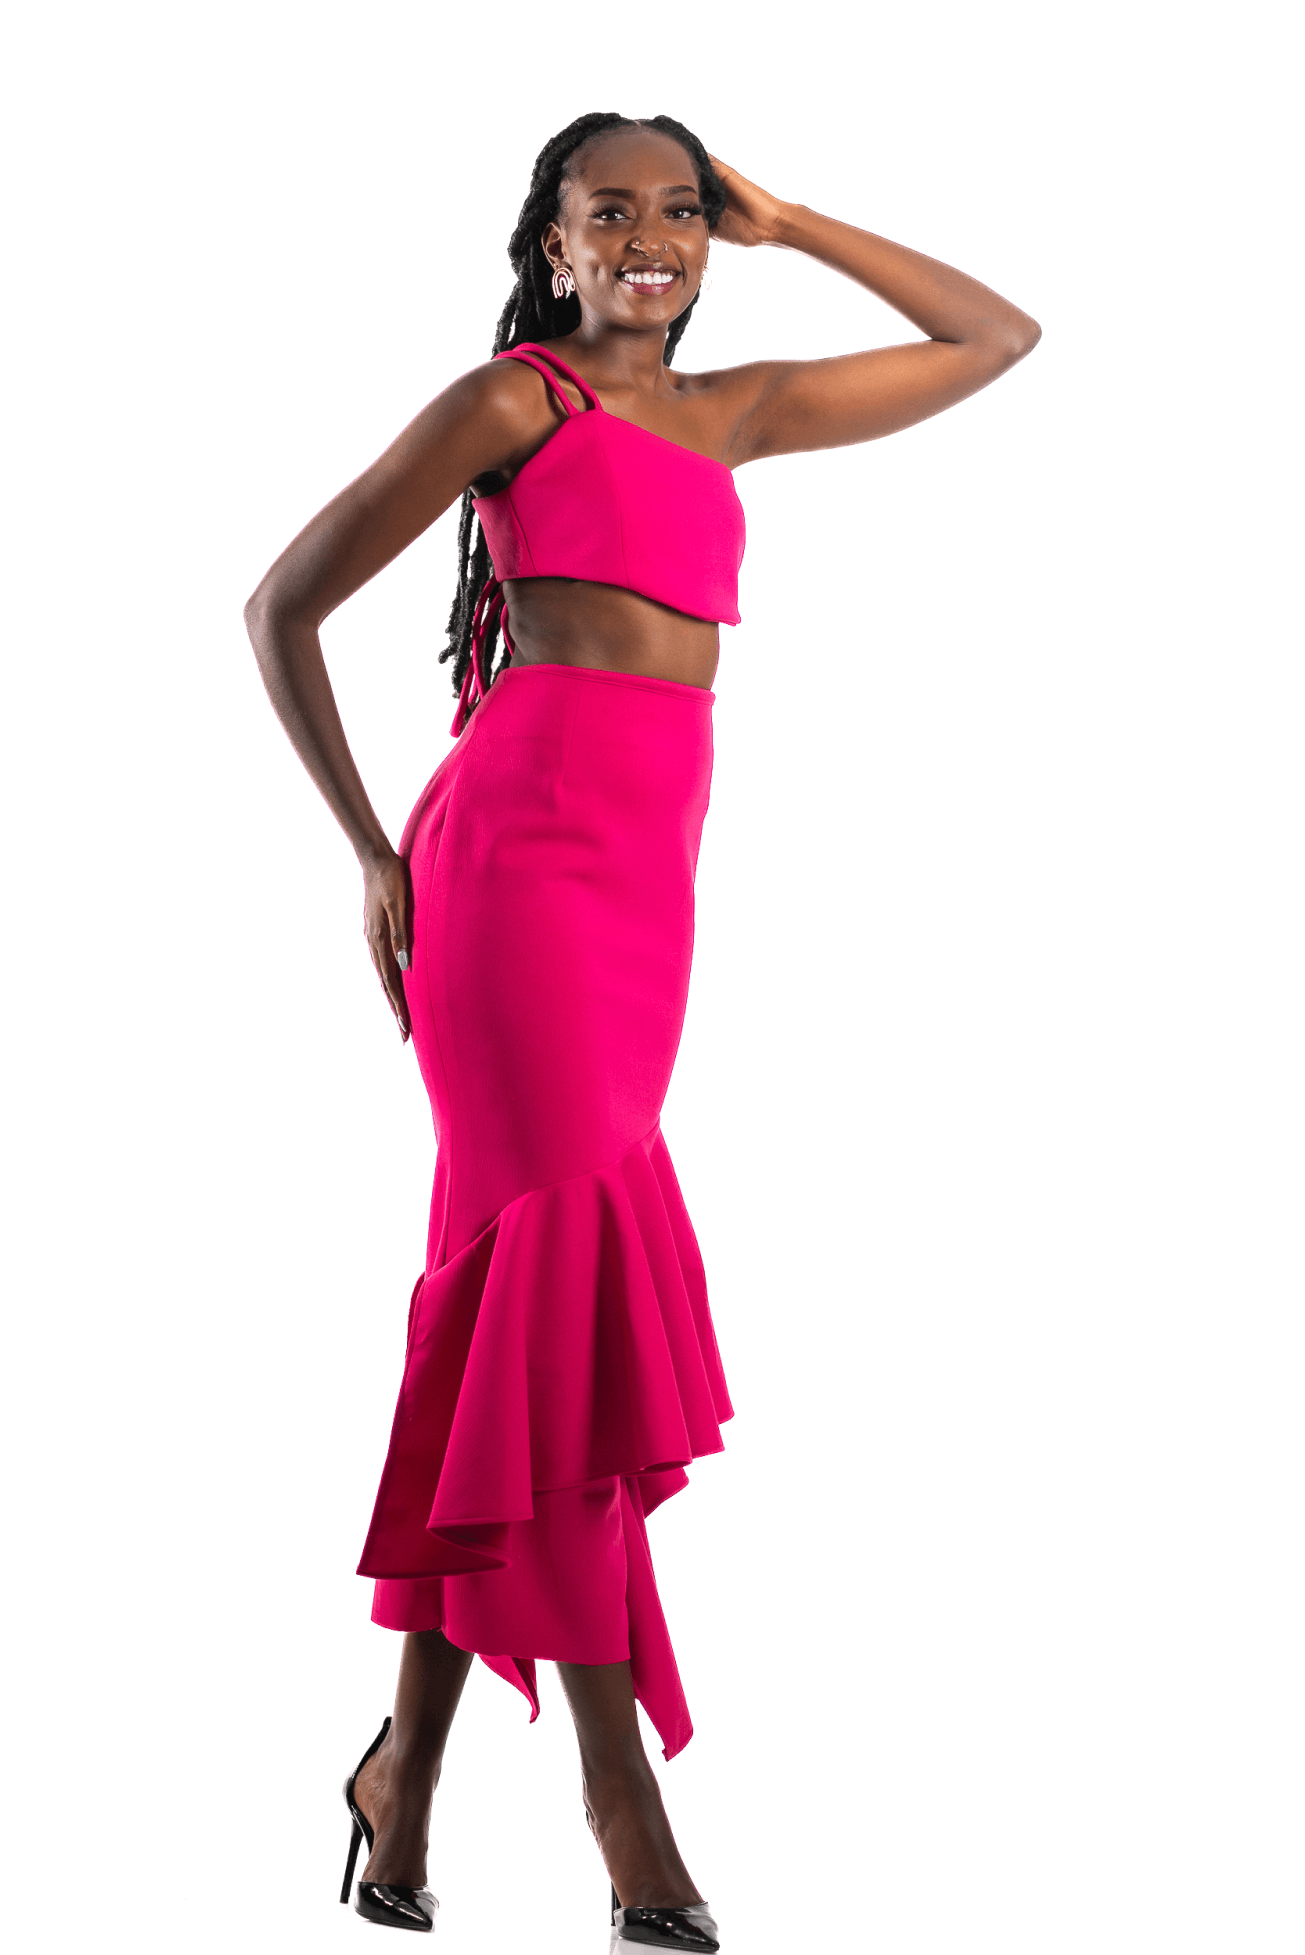 Shop Set of 2: Ruffle Maxi Skirt & Corset Crop Top by Eva Wambutu on Arrai. Discover stylish, affordable clothing, jewelry, handbags and unique handmade pieces from top Kenyan & African fashion brands prioritising sustainability and quality craftsmanship.